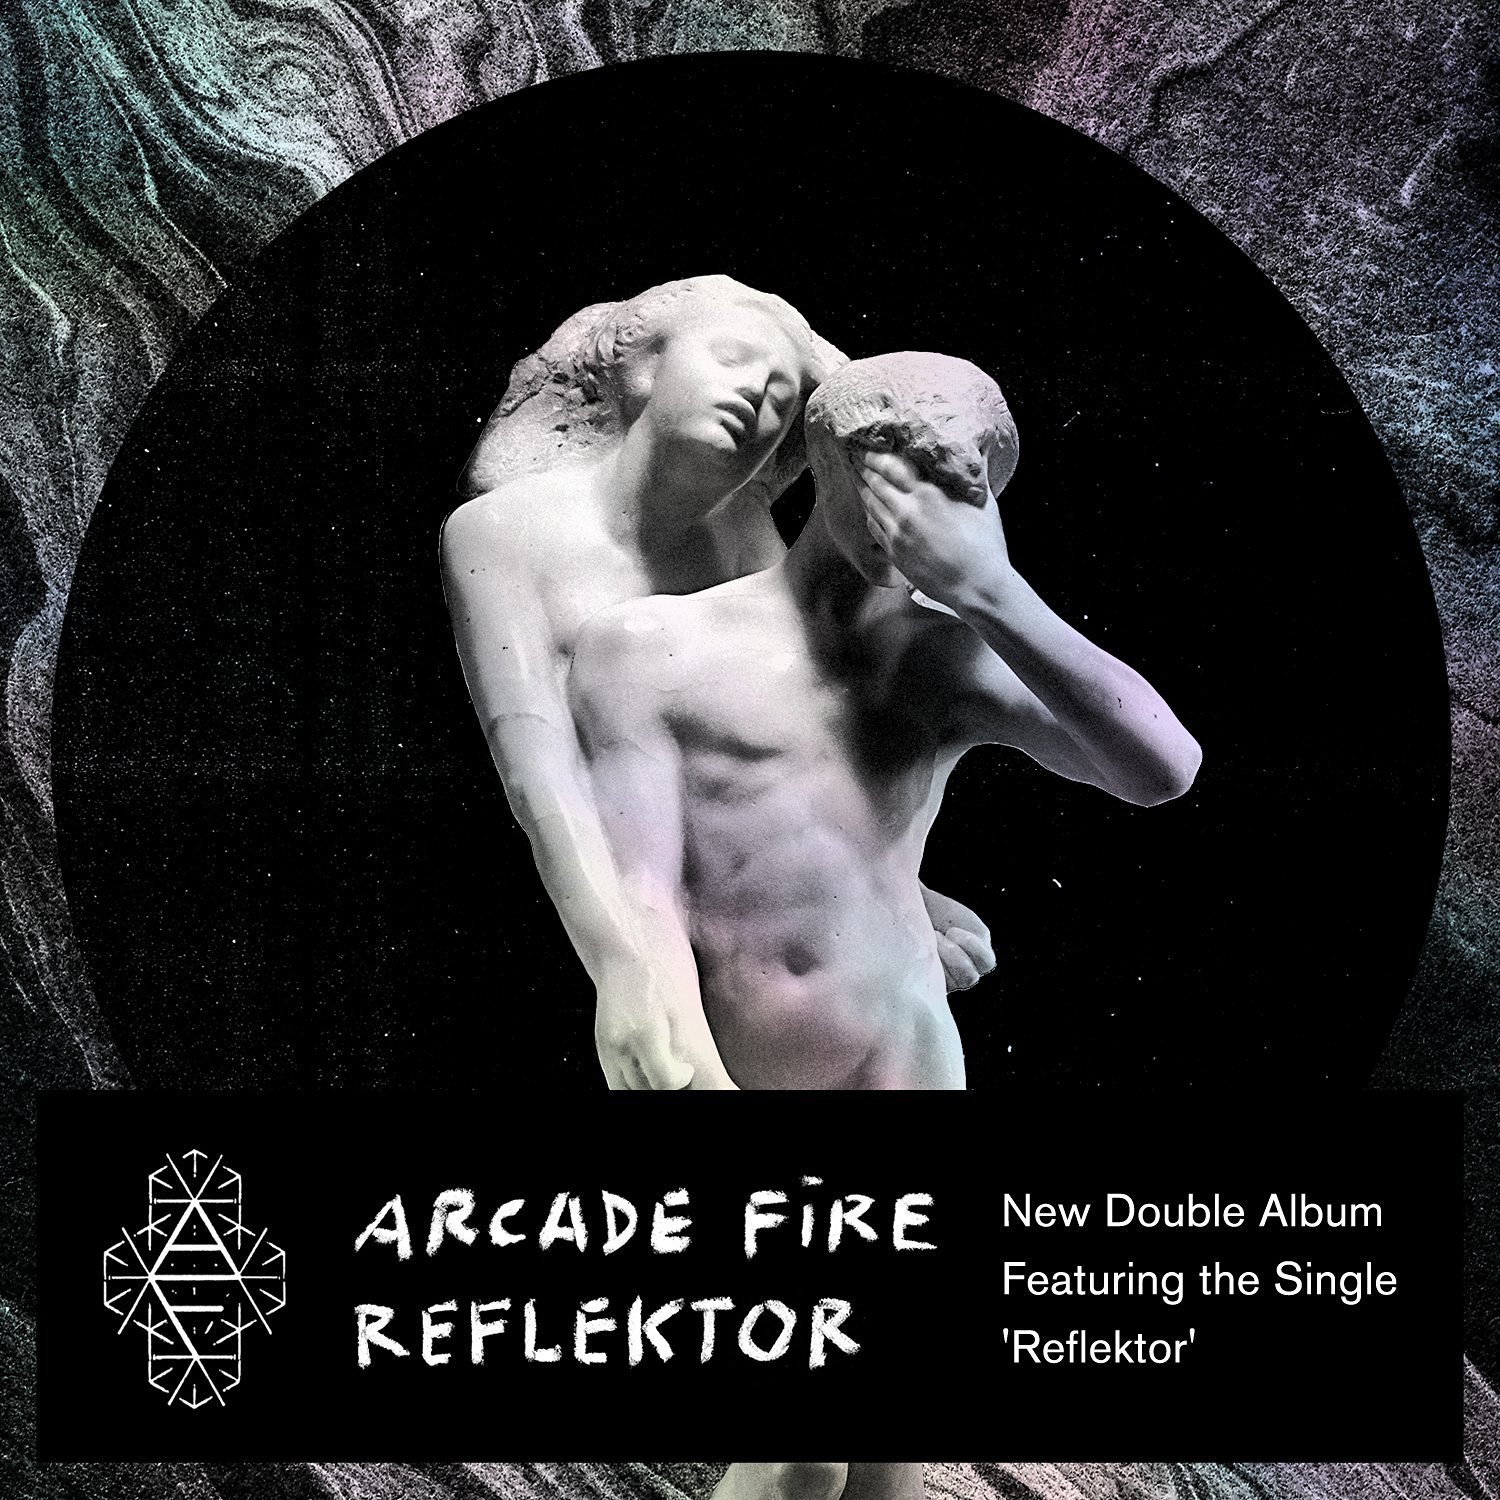 ‘Normal Person’ by Arcade Fire